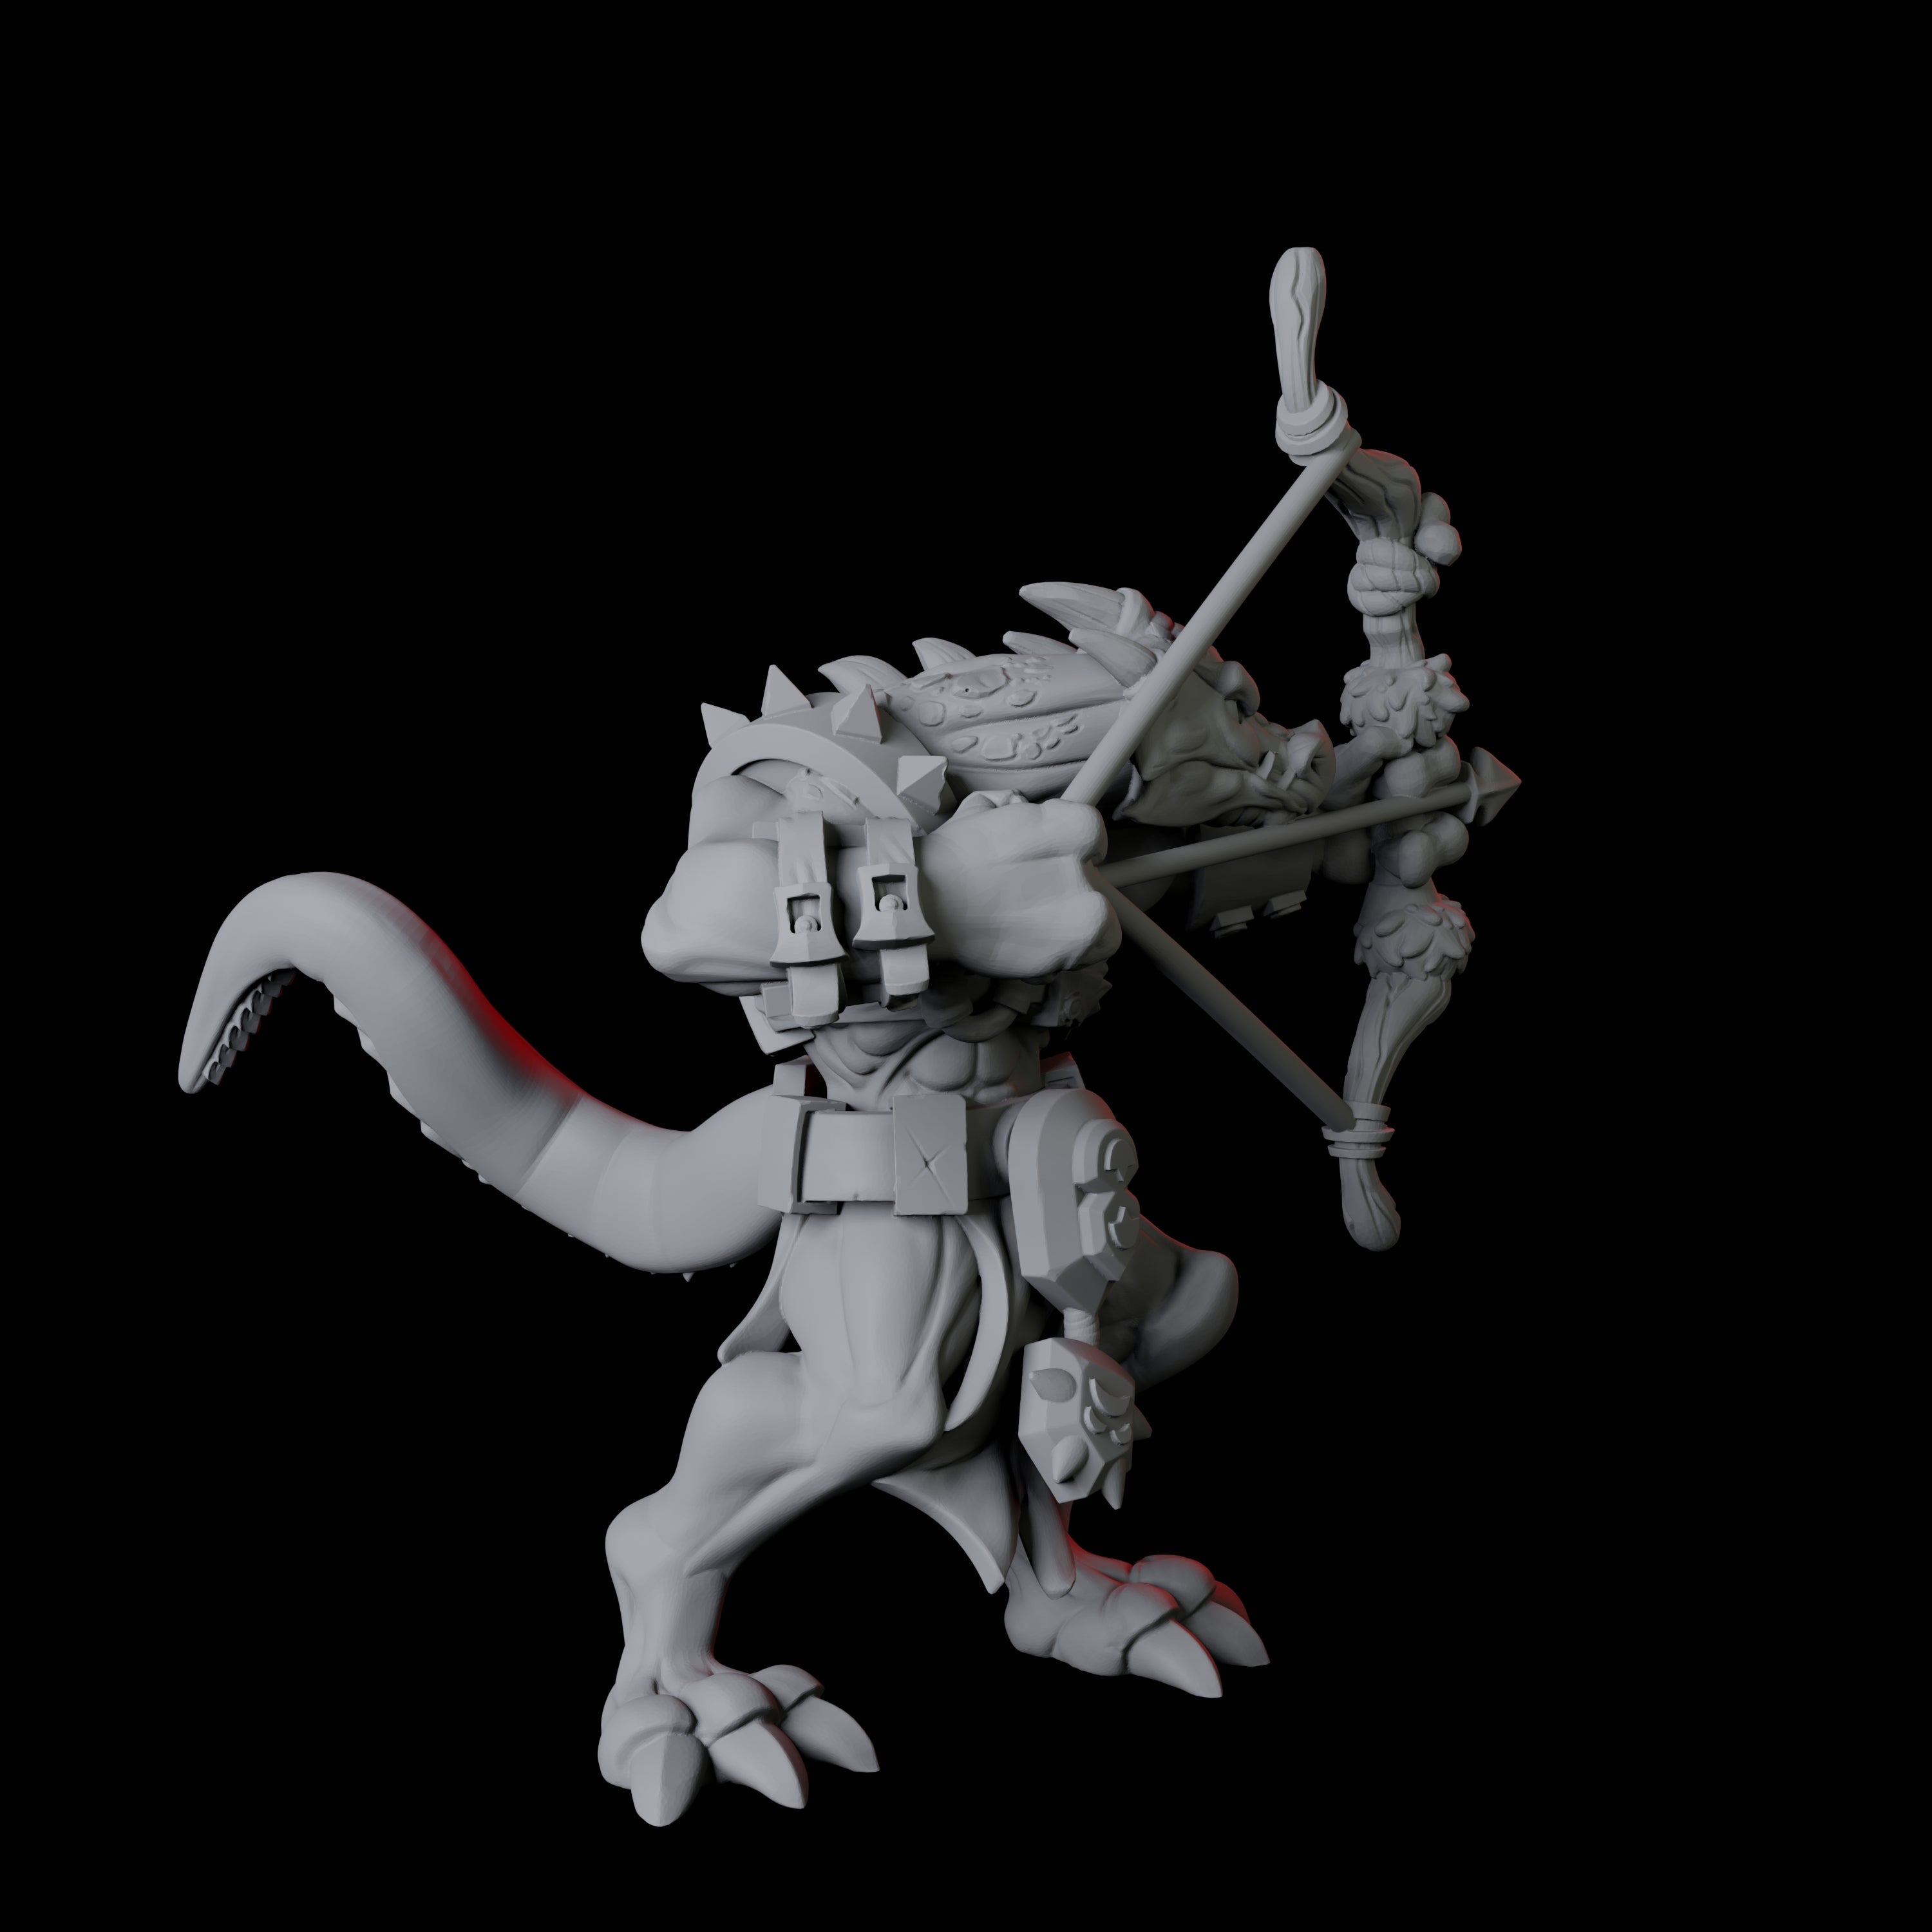 Four Kobold Rangers Miniature for Dungeons and Dragons, Pathfinder or other TTRPGs